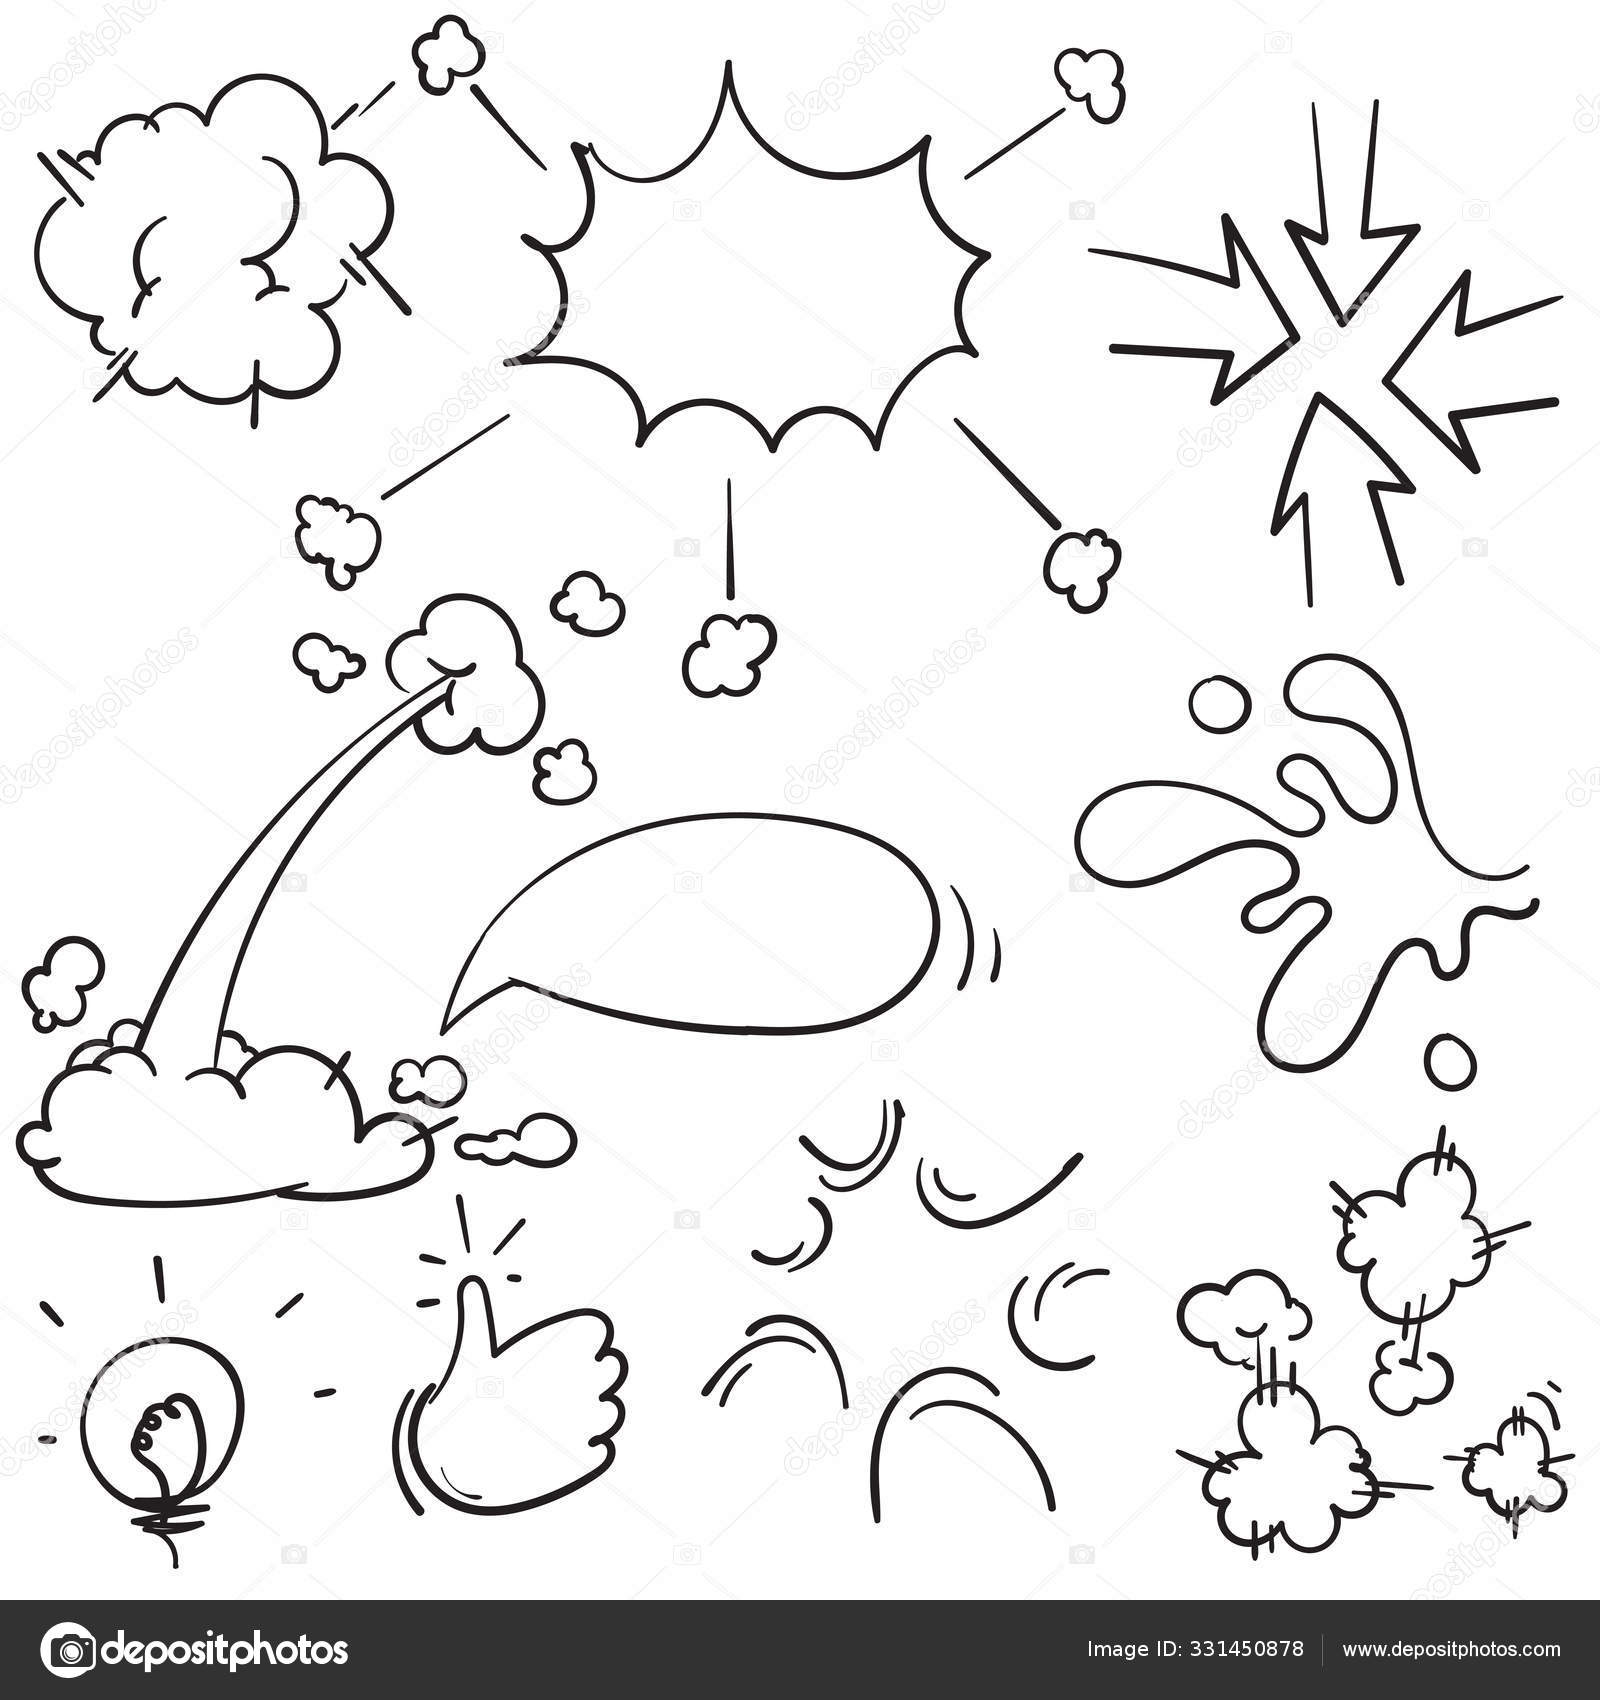 Speed hand drawn fast motion clouds, smoke blast or puff cloud